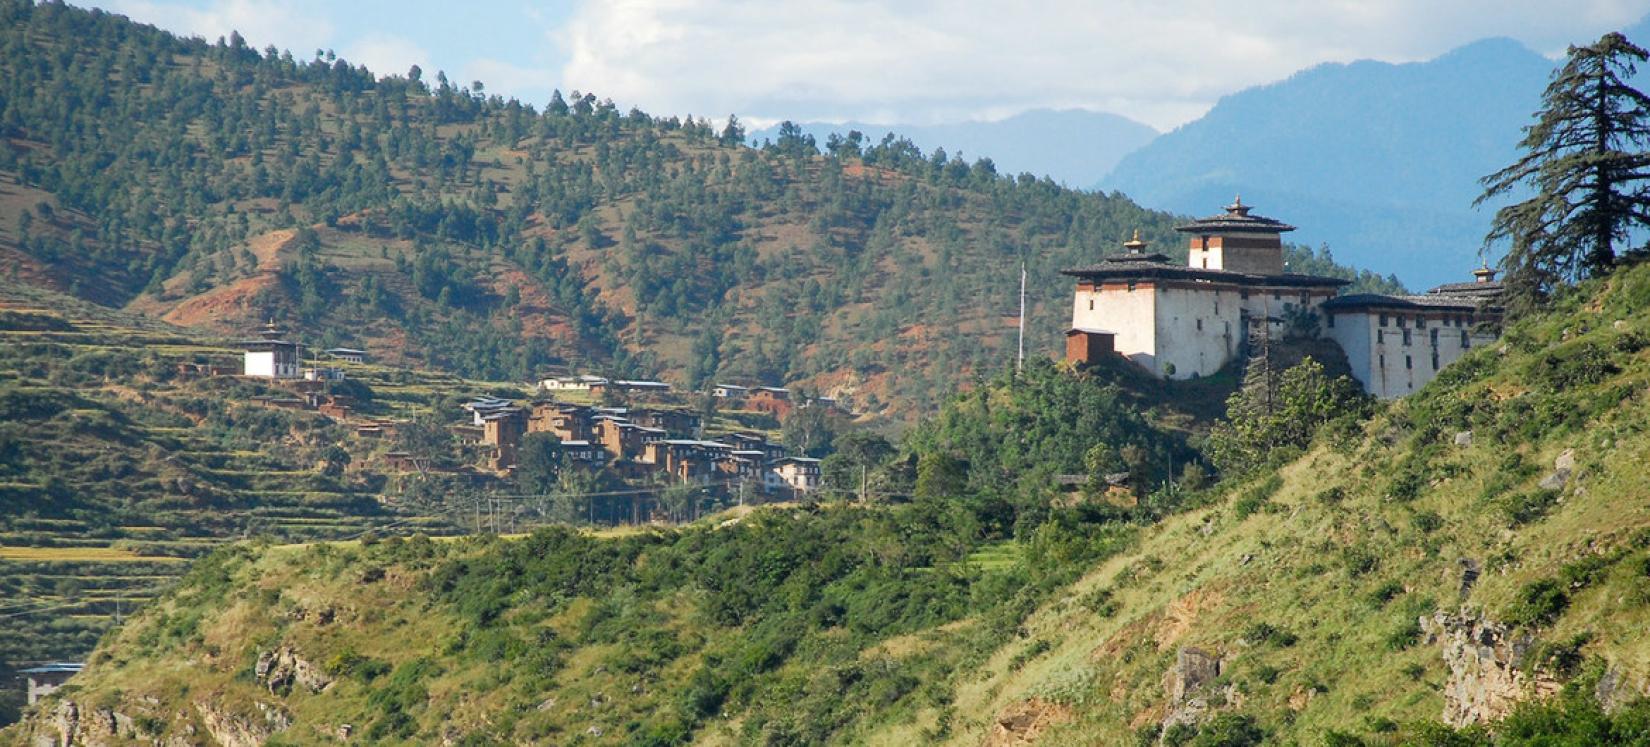 Many people live in remote areas in Bhutan